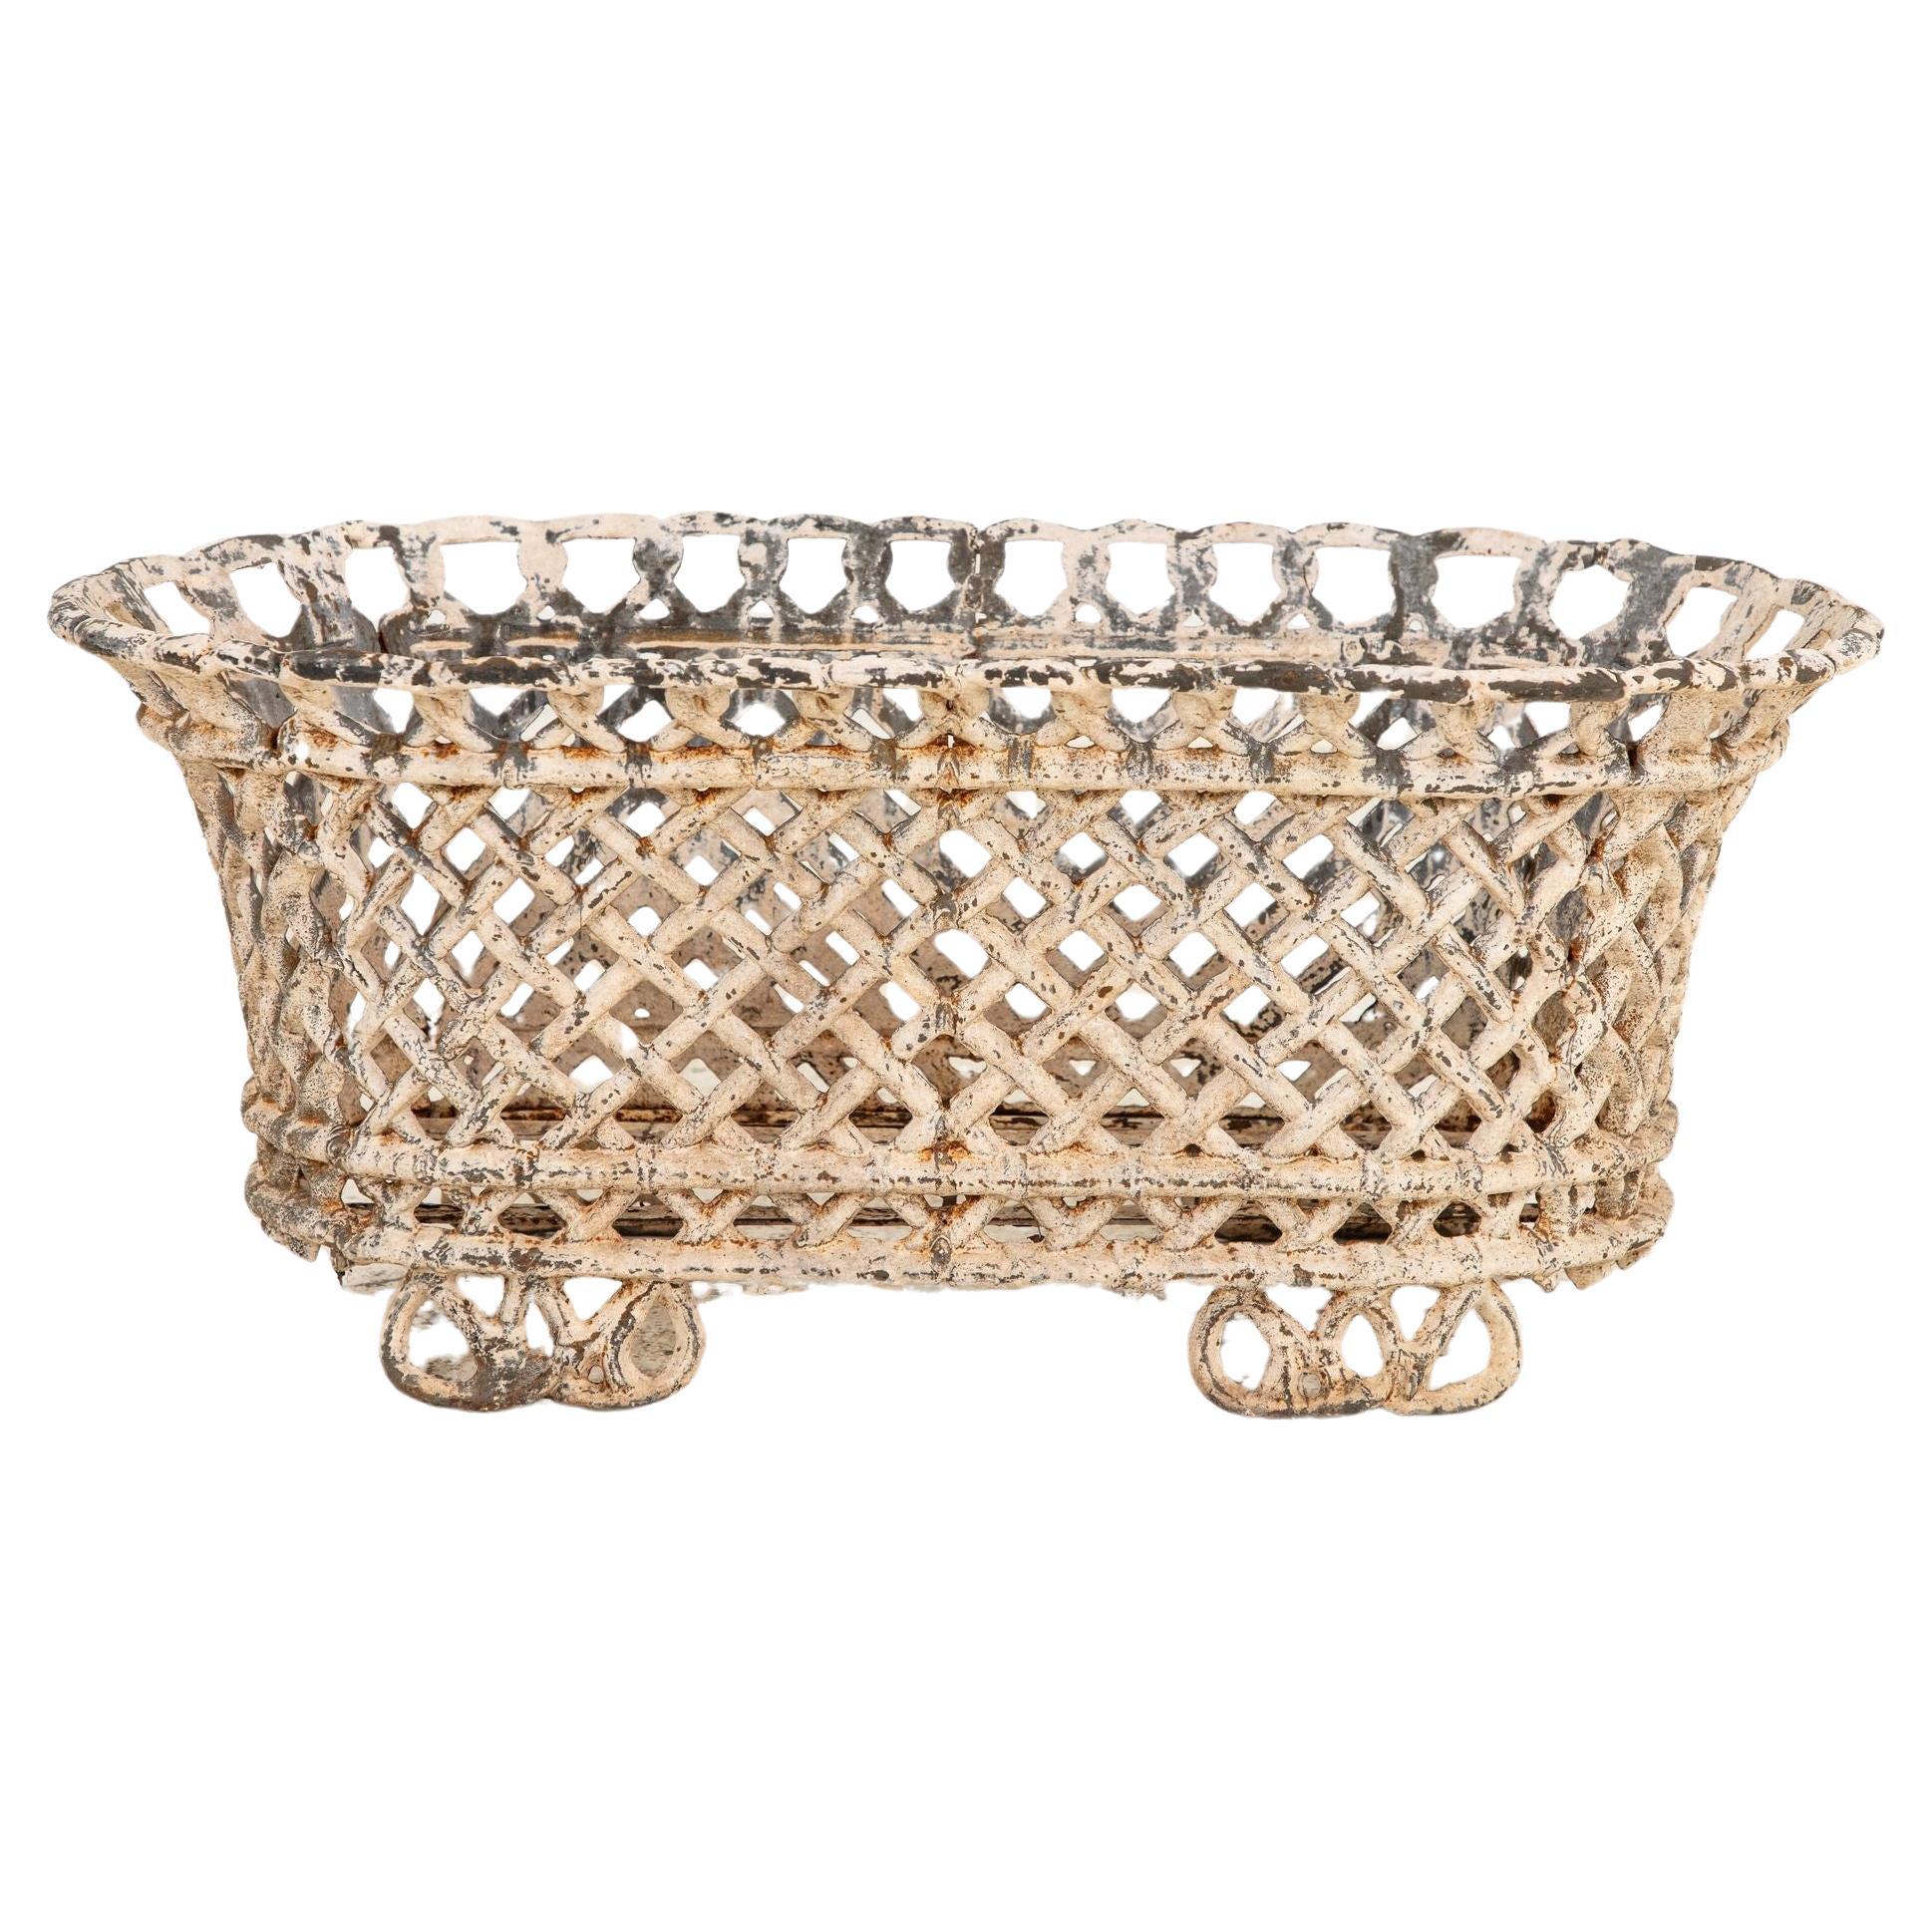 White Painted Cast Iron Latticework Basket, French early 20th C.